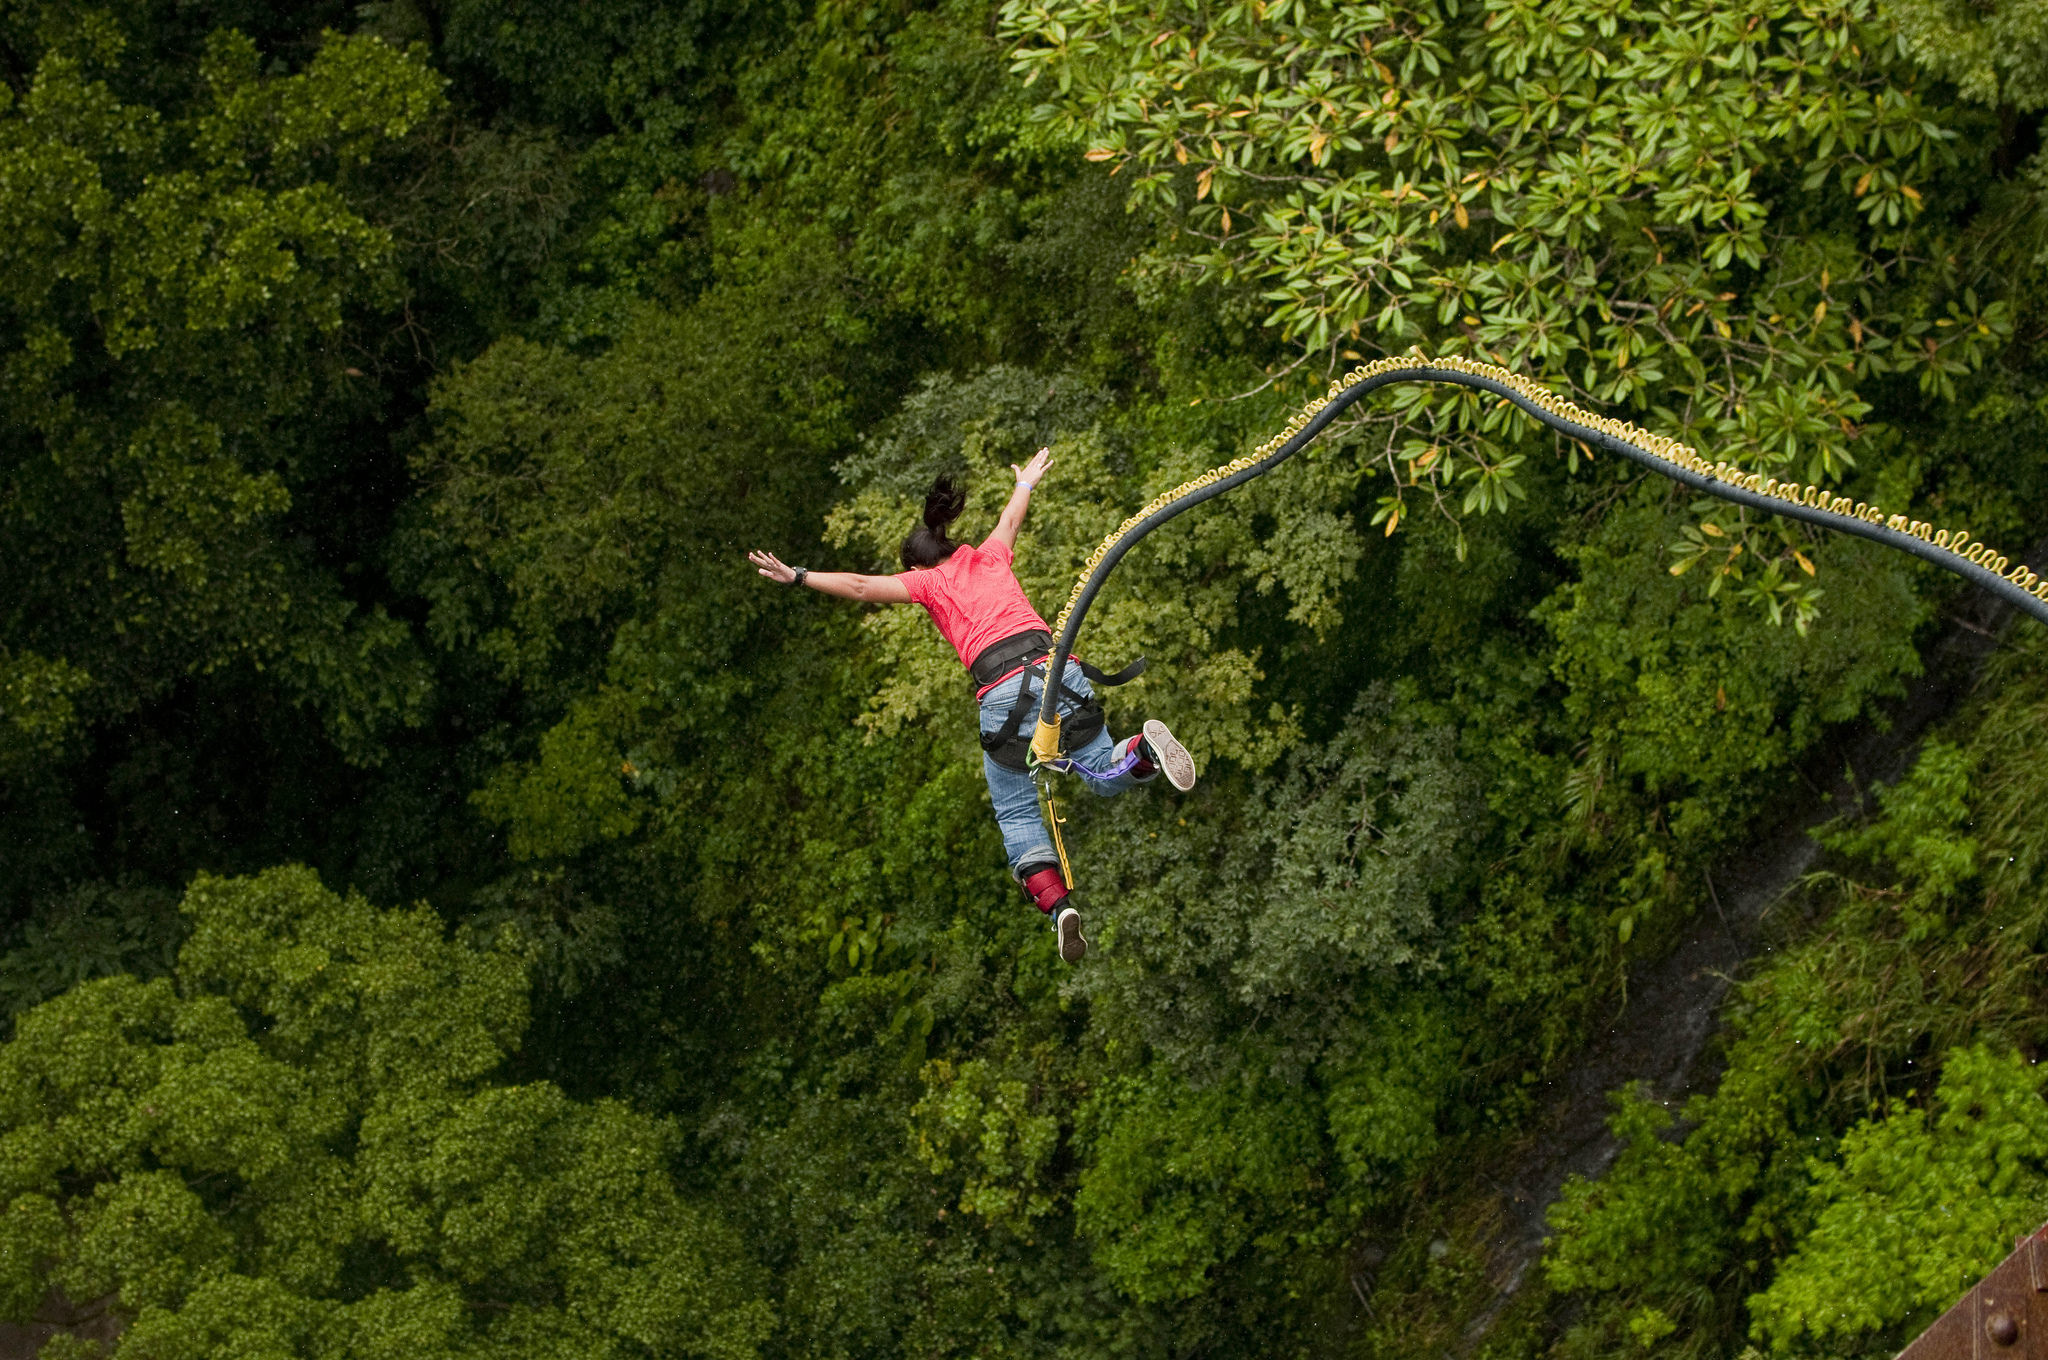 Bungee Jumping: Extreme activity in Rishikesh forest, The foothills of the Himalayas in northern India. 2050x1360 HD Wallpaper.